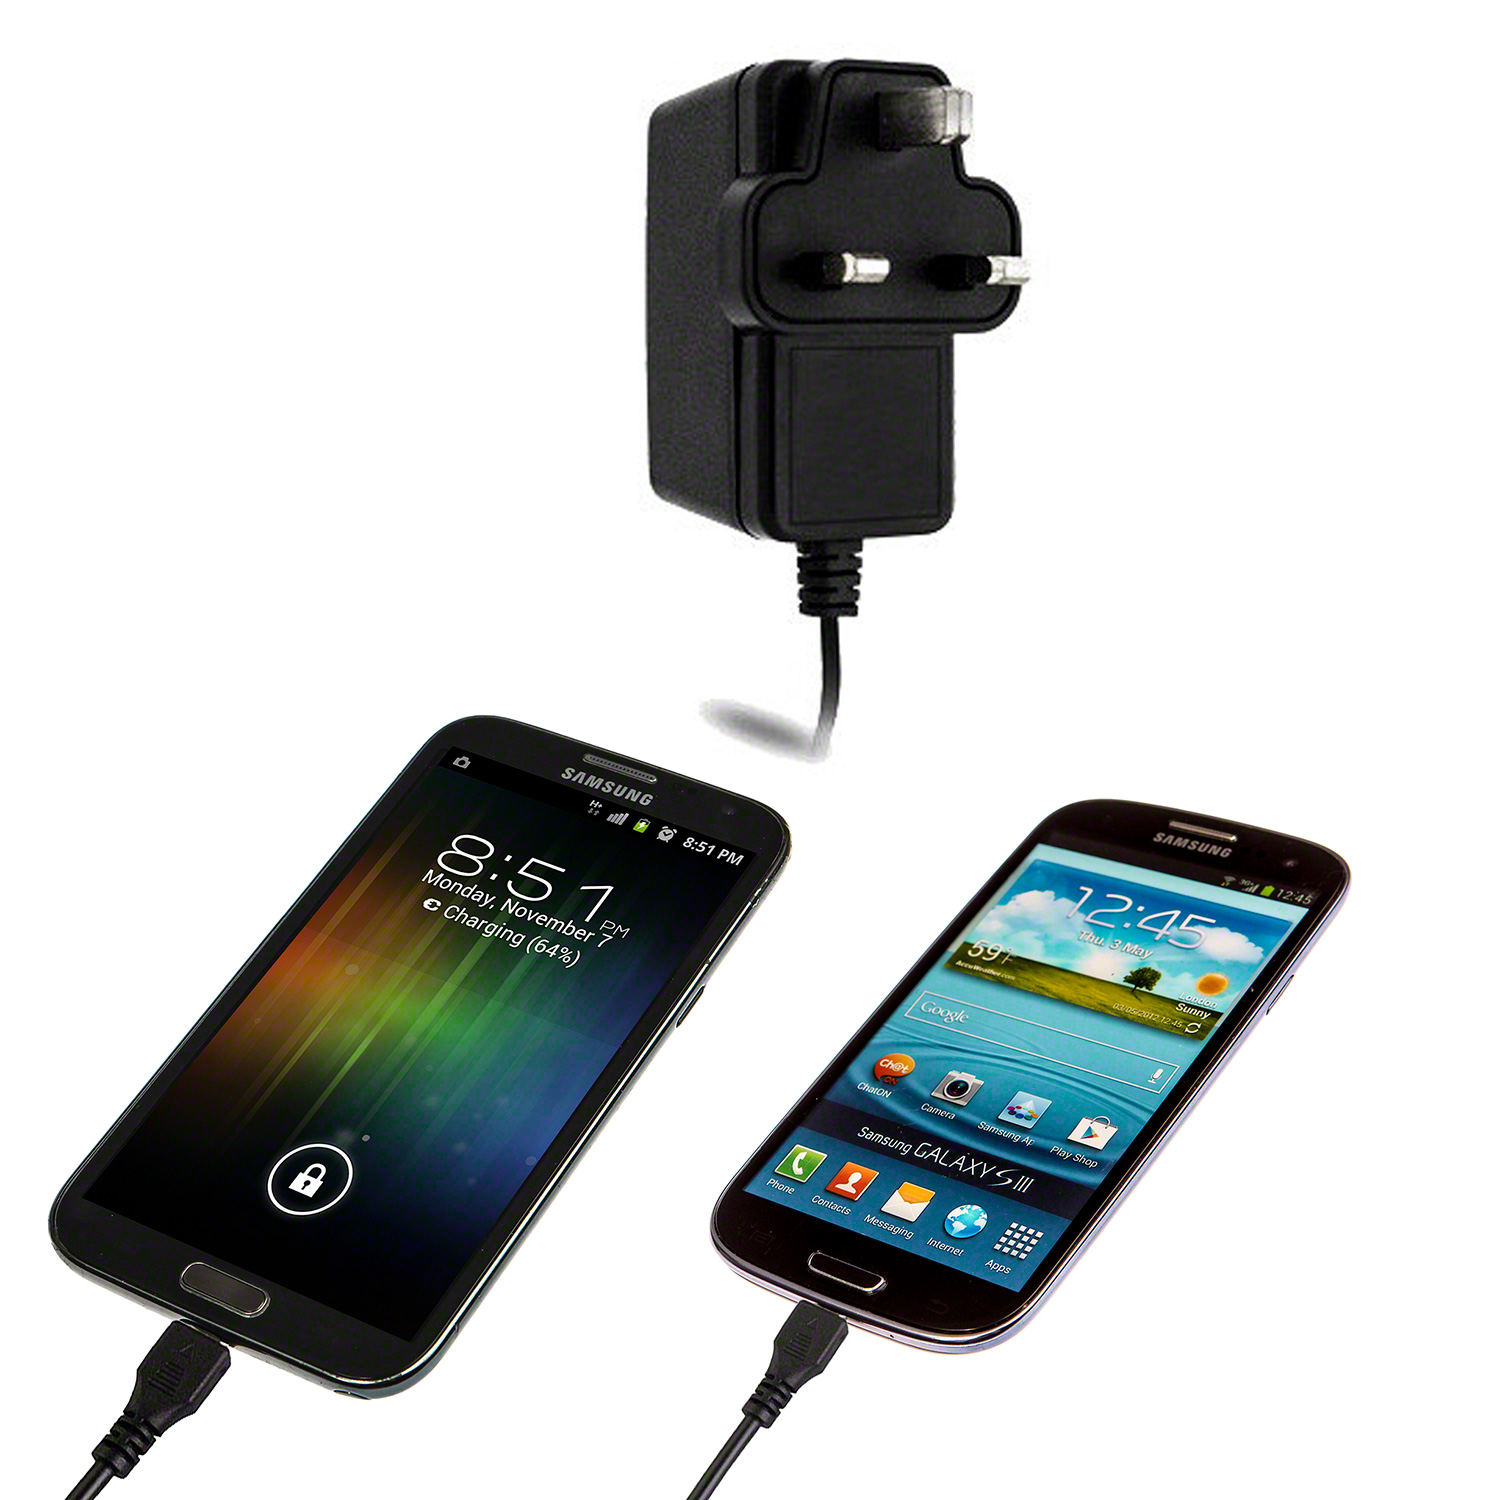 Pama 1 Amp UK Mains Micro USB Charger for Smartphones and Tablets